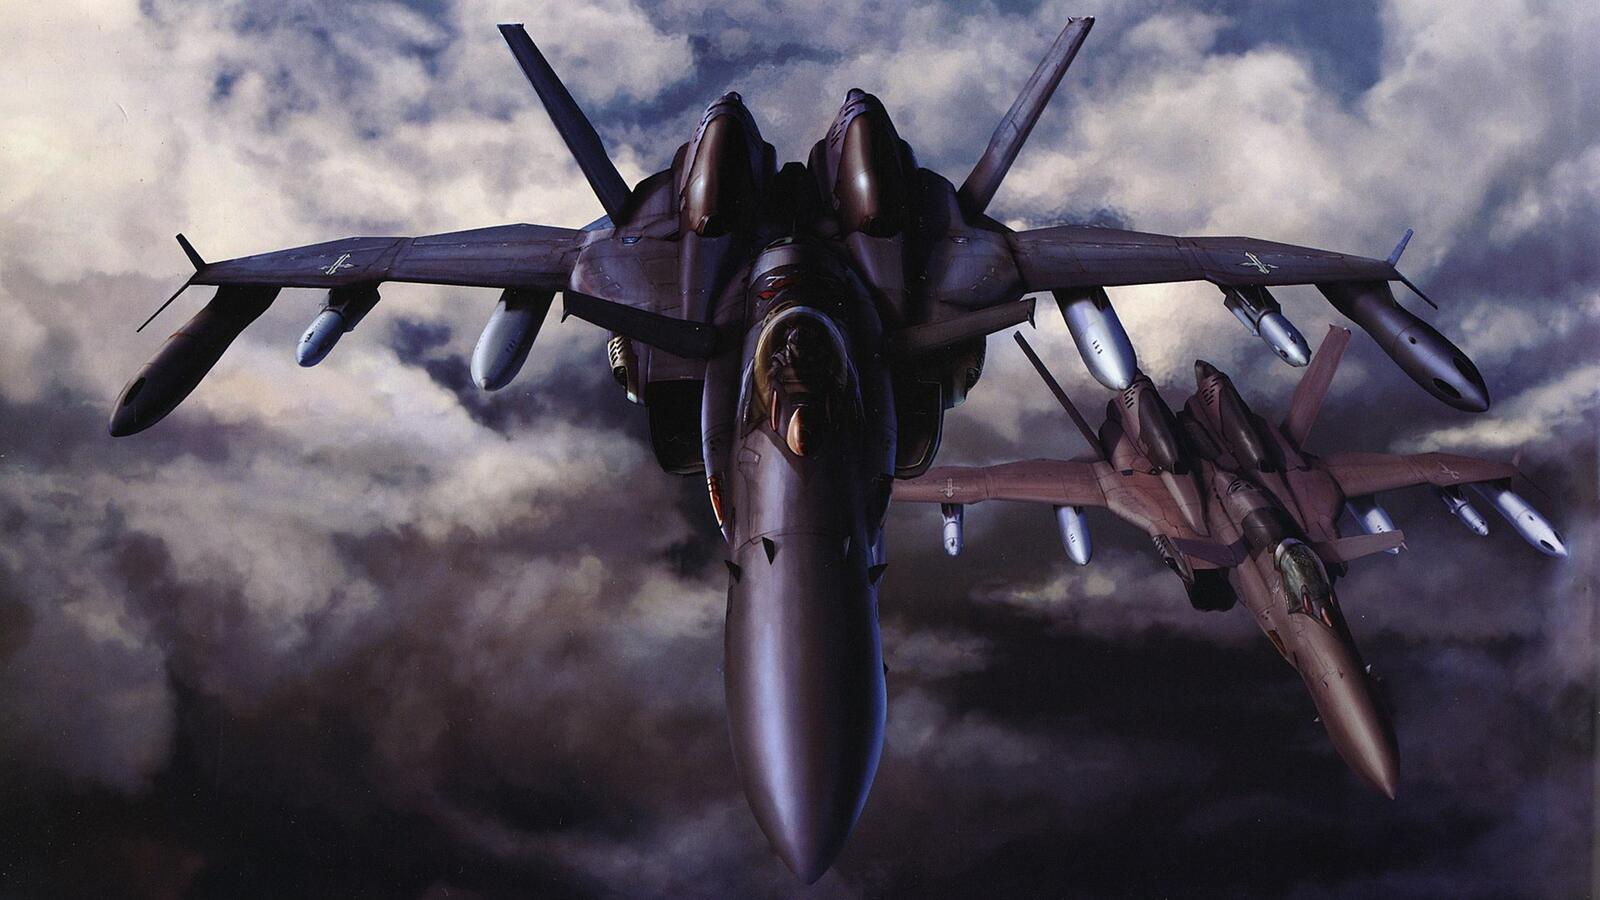 Wallpapers military macross military aircraft on the desktop